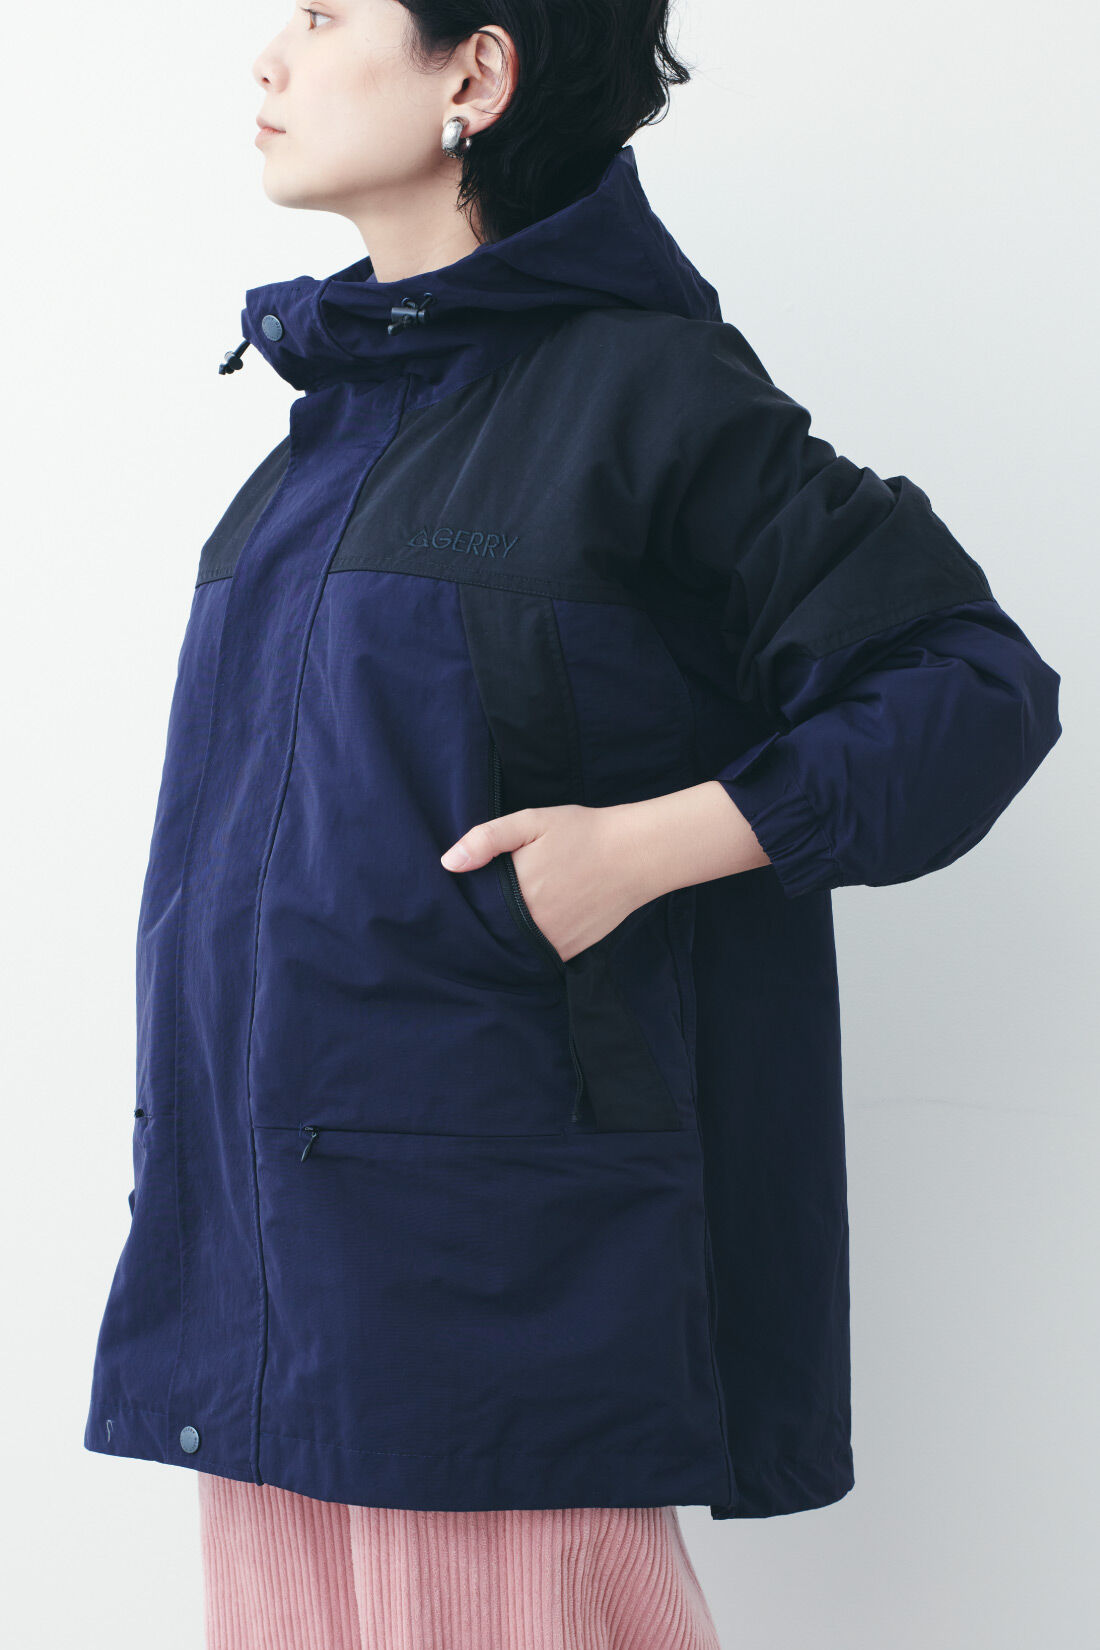 Real Stock|MEDE19F 〈SELECT〉 GERRY 3-WAY MOUNTAIN PARKA〈MN〉